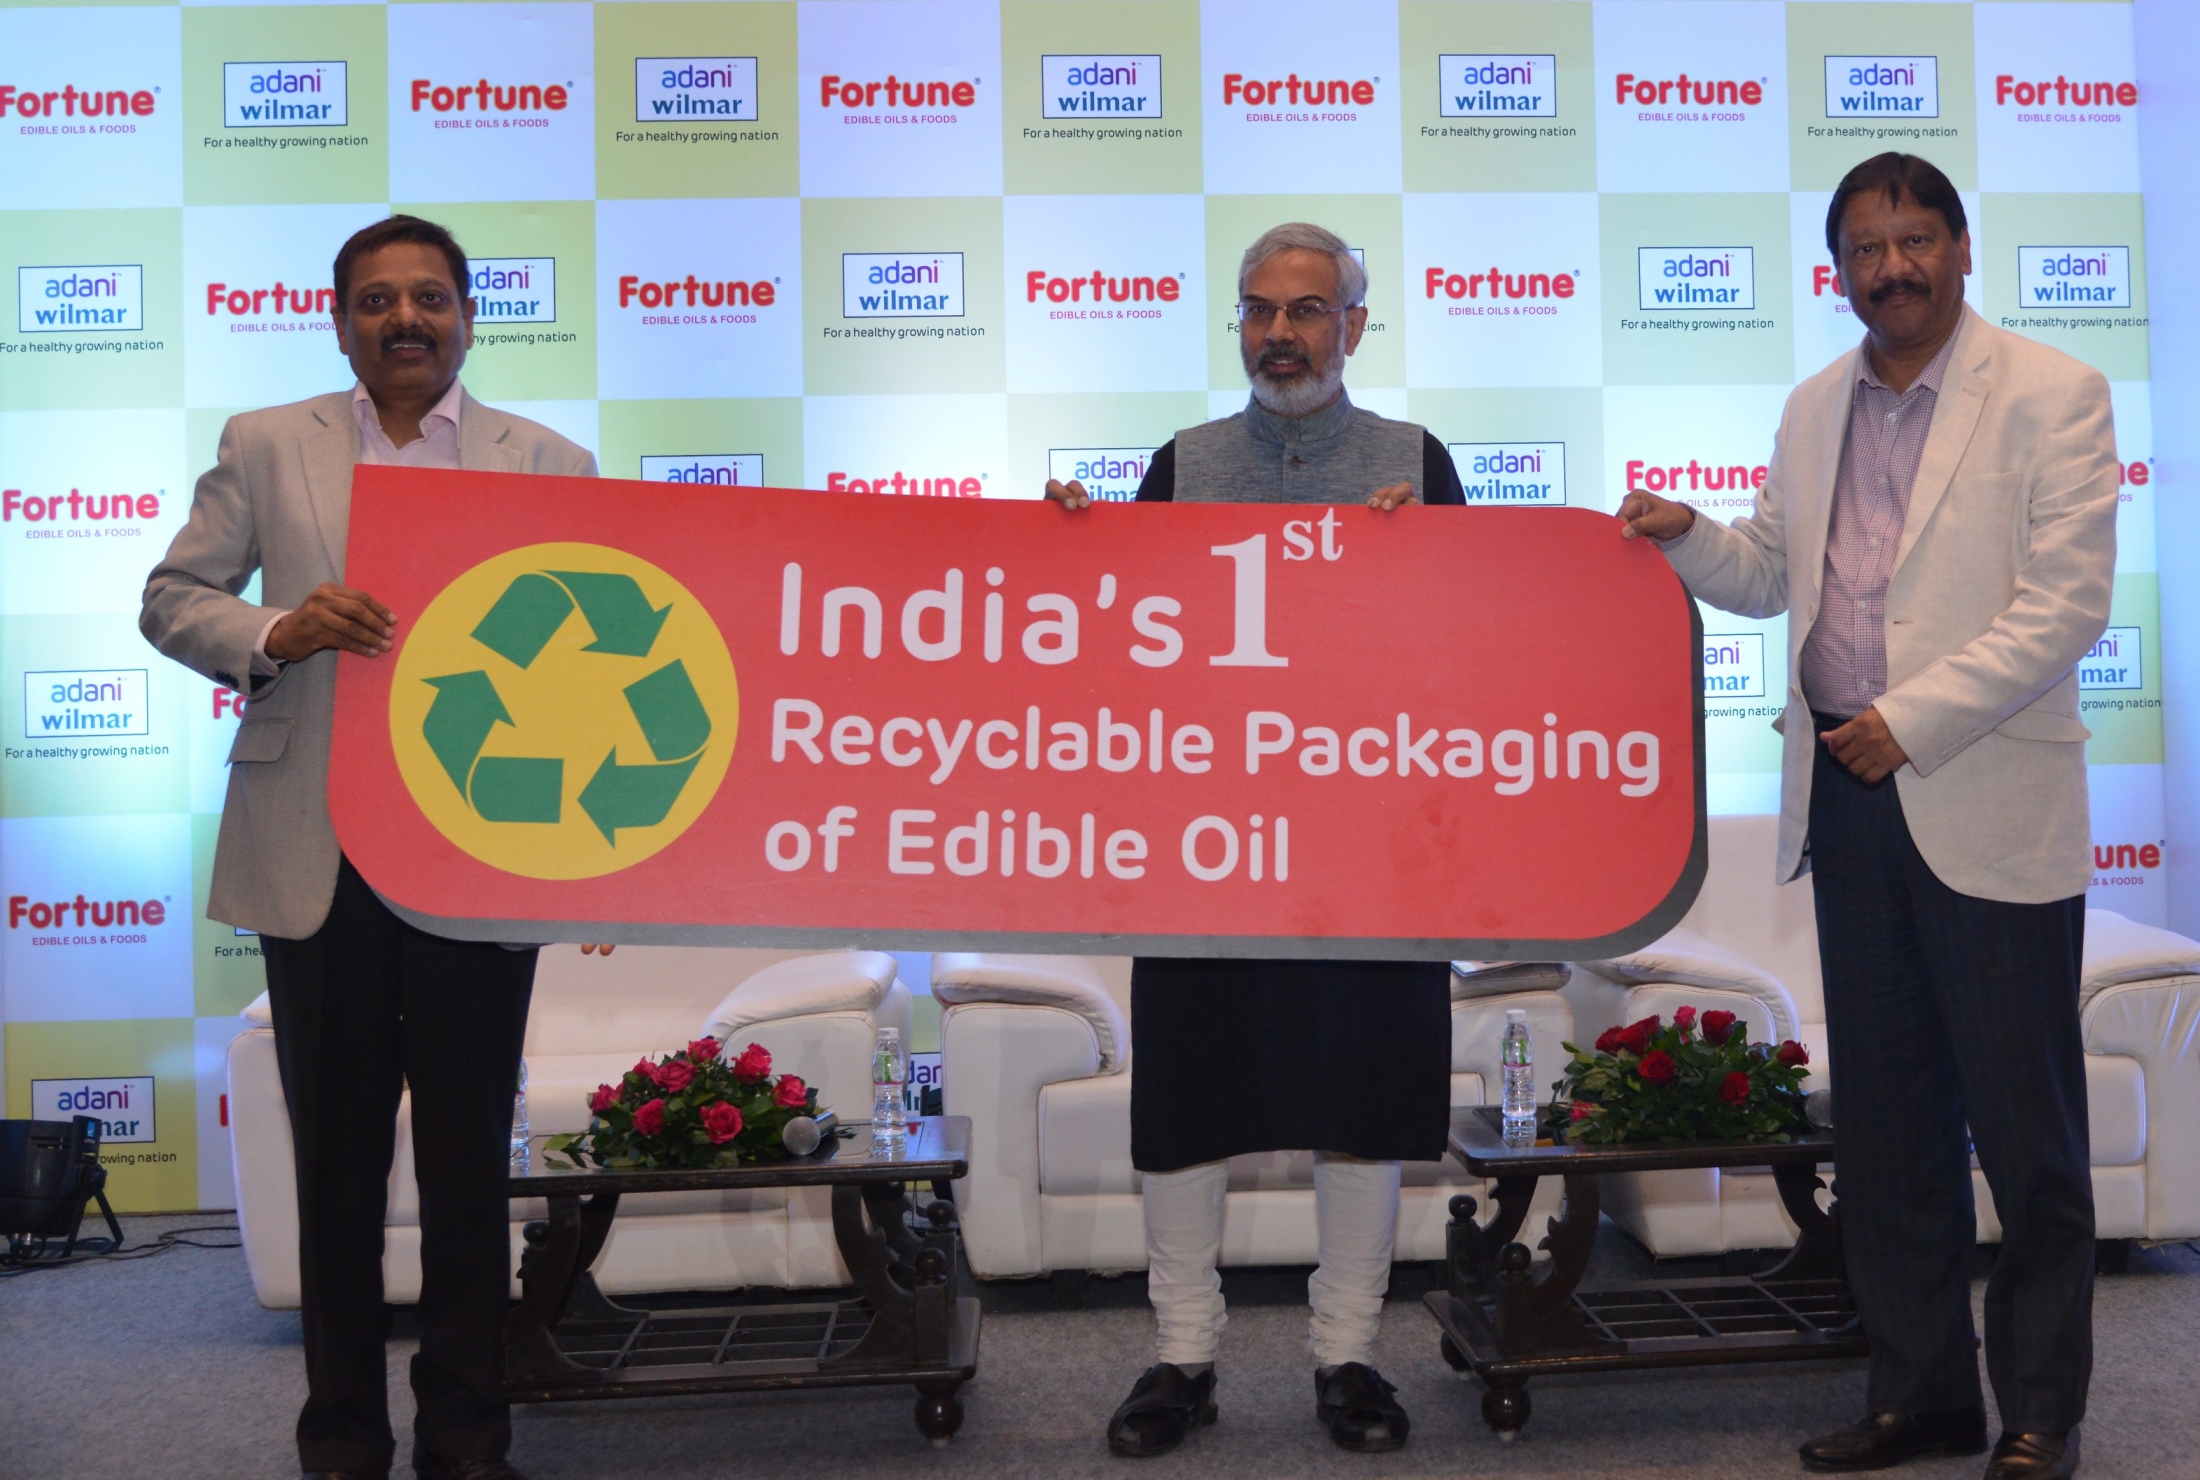 Adani Wilmarto replace its Fortuneedible oil packaging